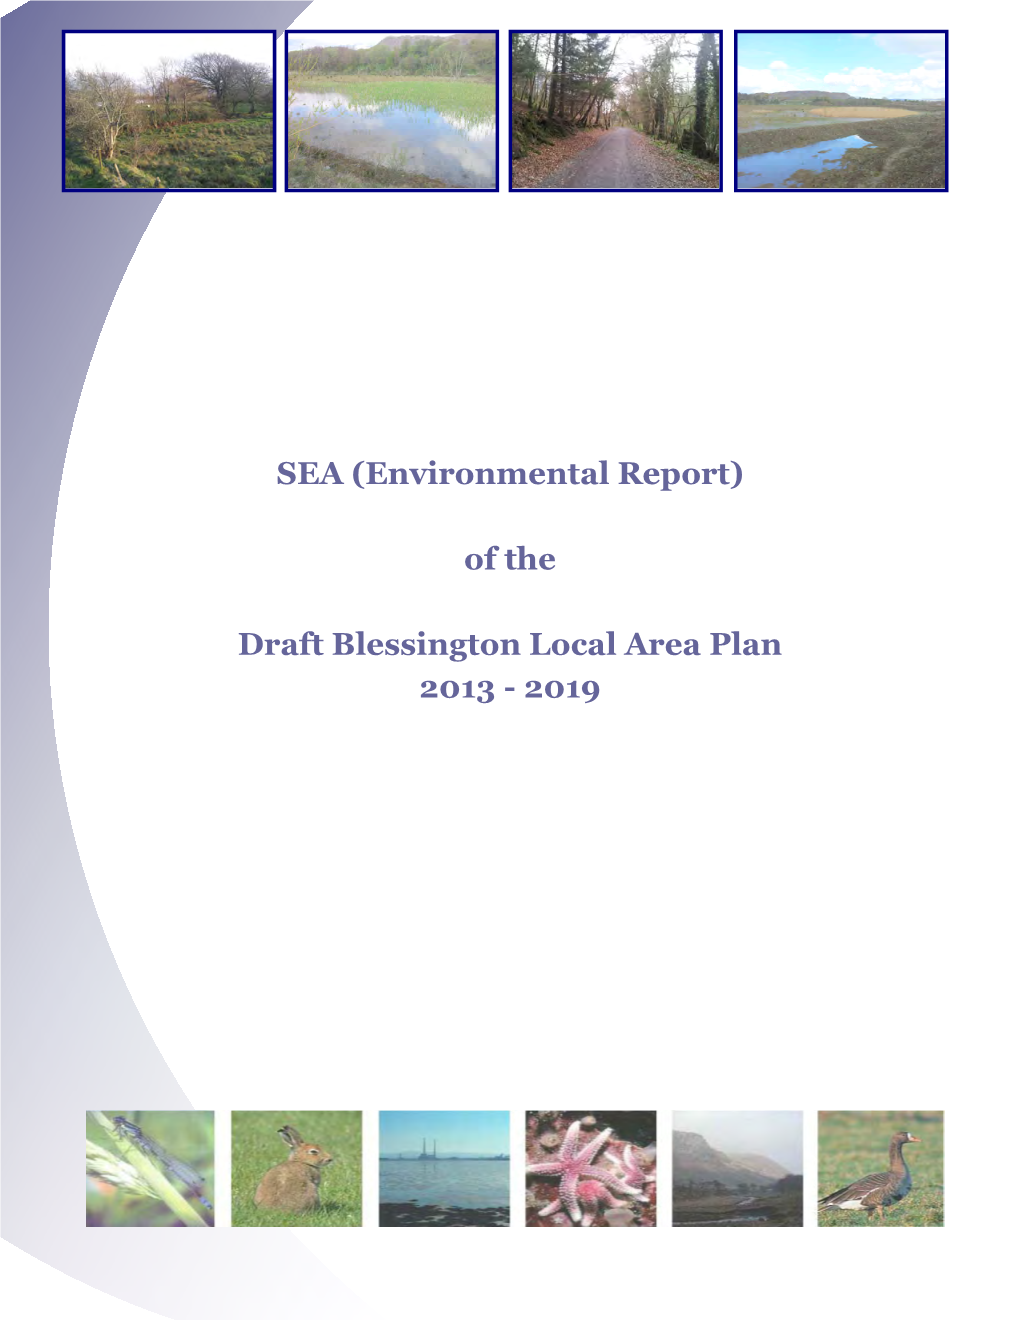 (Environmental Report) of the Draft Blessington Local Area Plan 2013